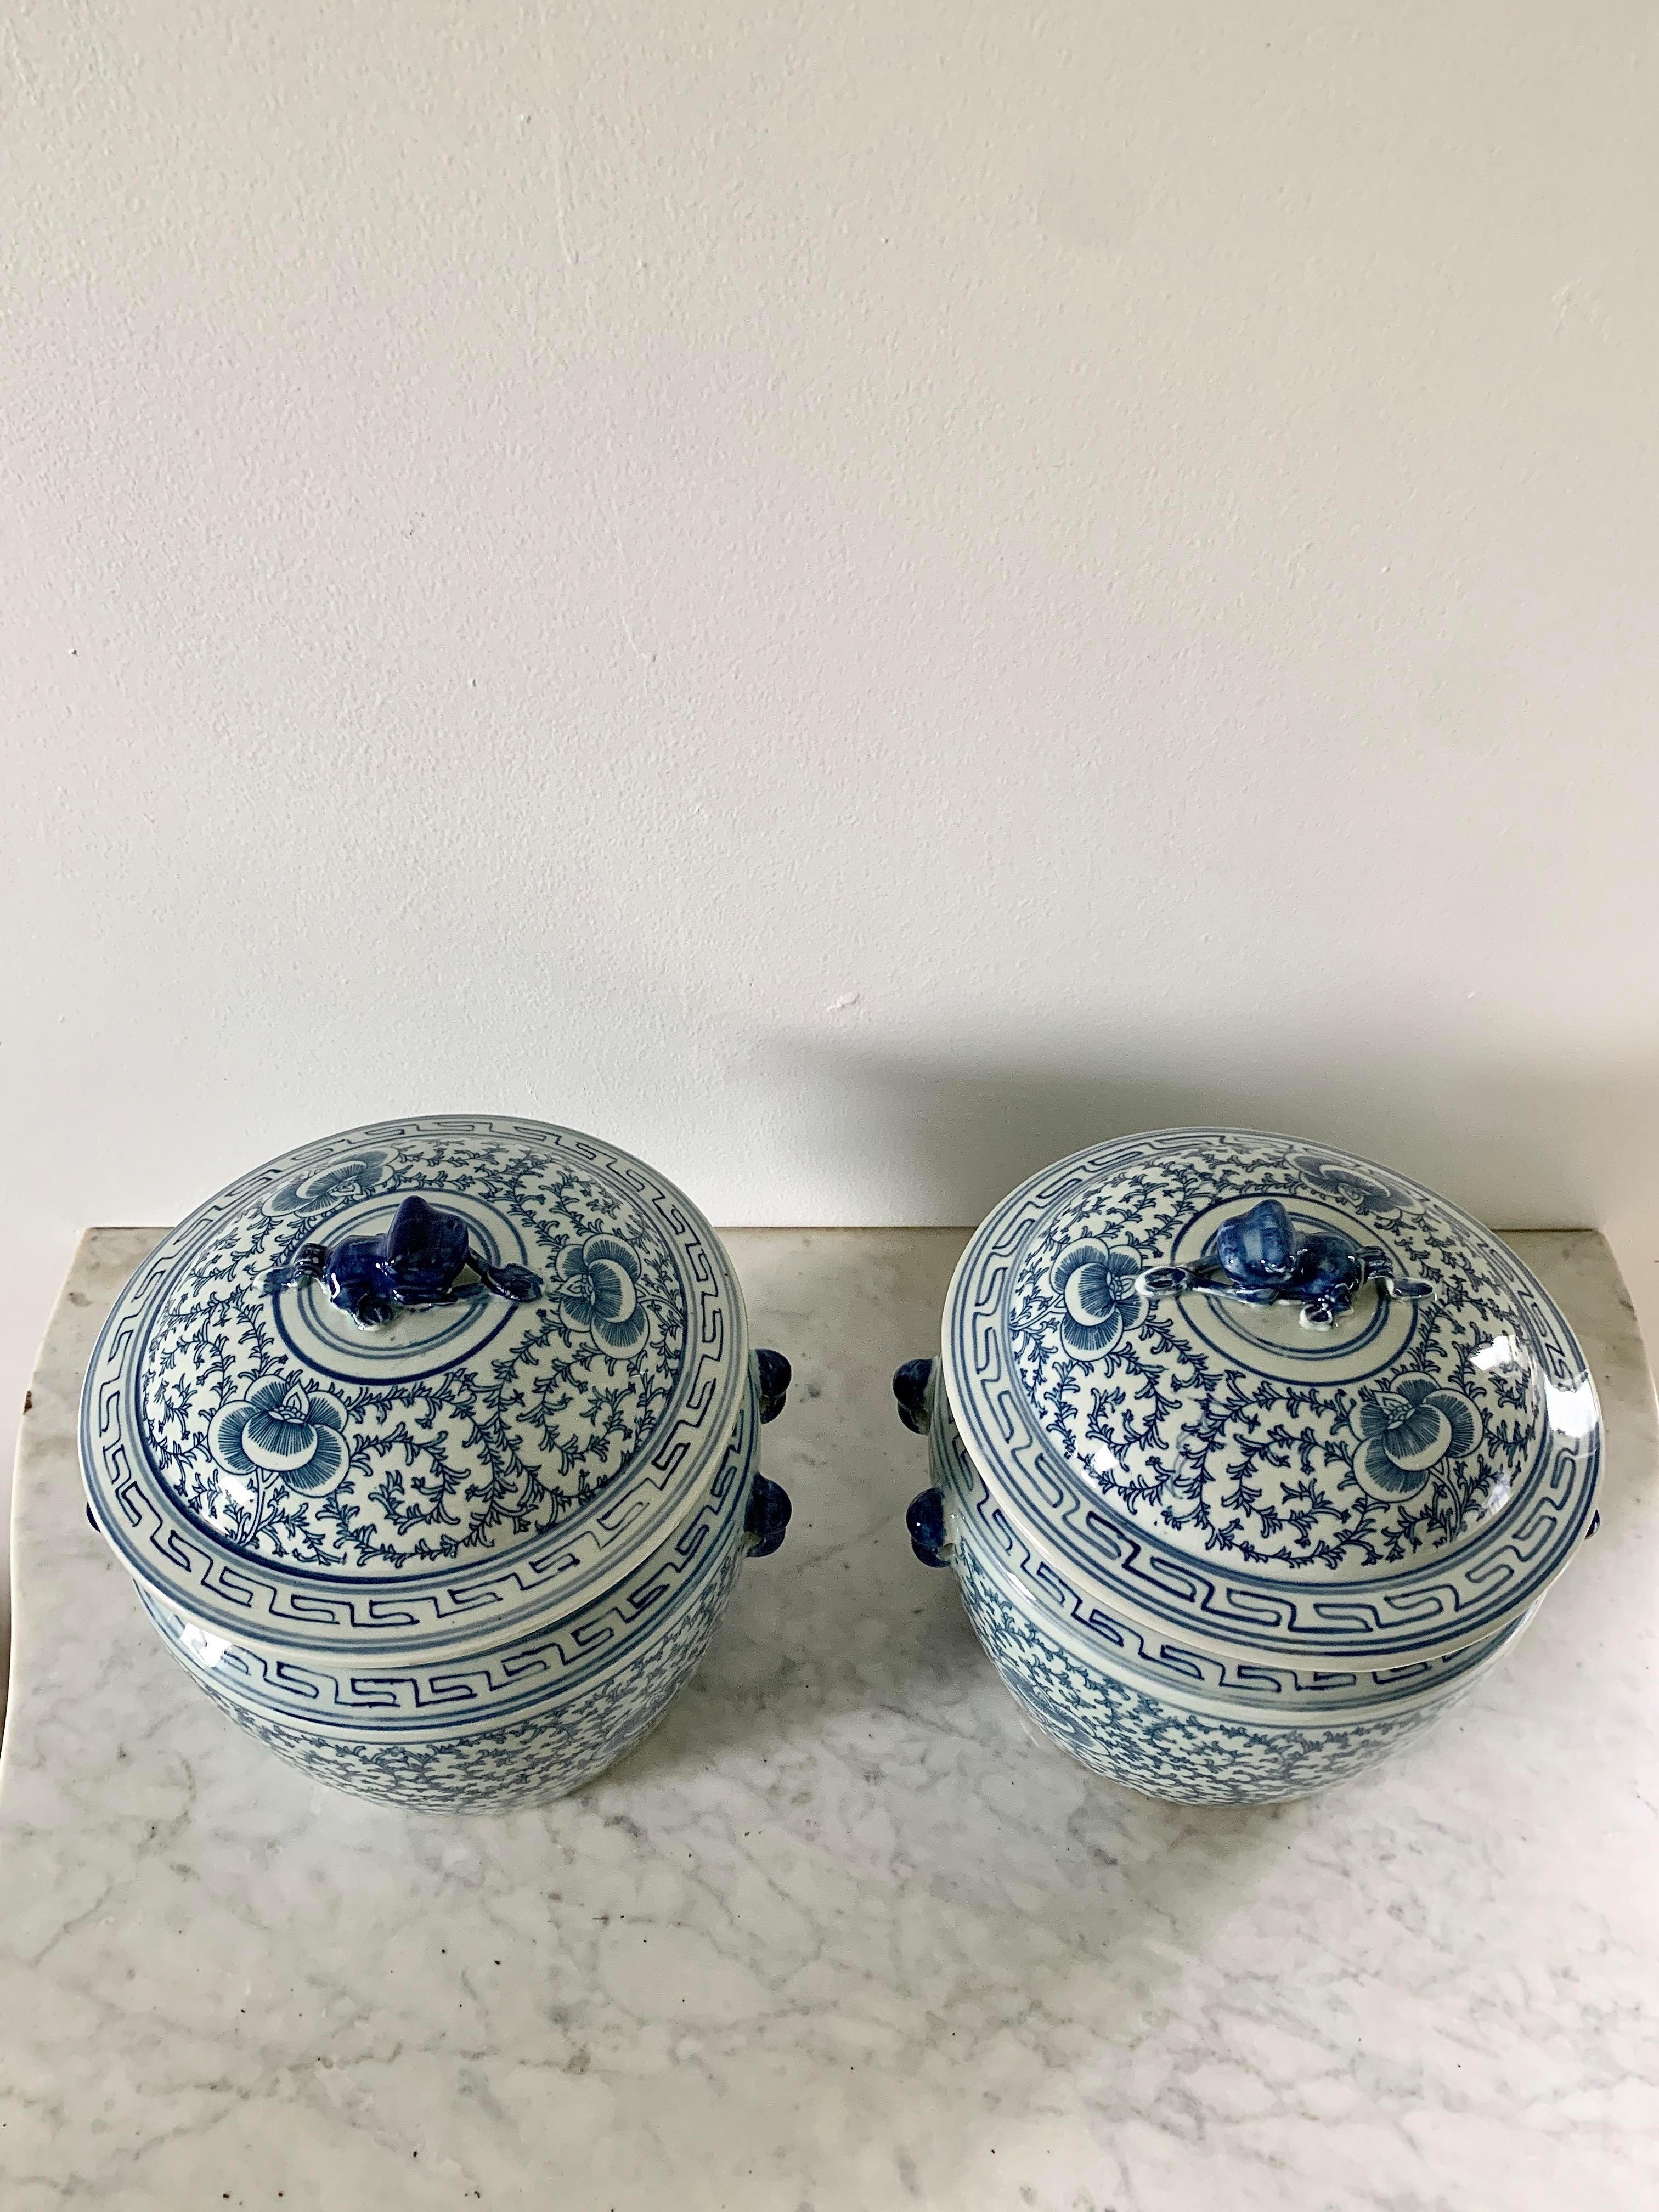 Chinoiserie Chinese Blue and White Porcelain Covered Jars with Foo Dog Finials, Pair For Sale